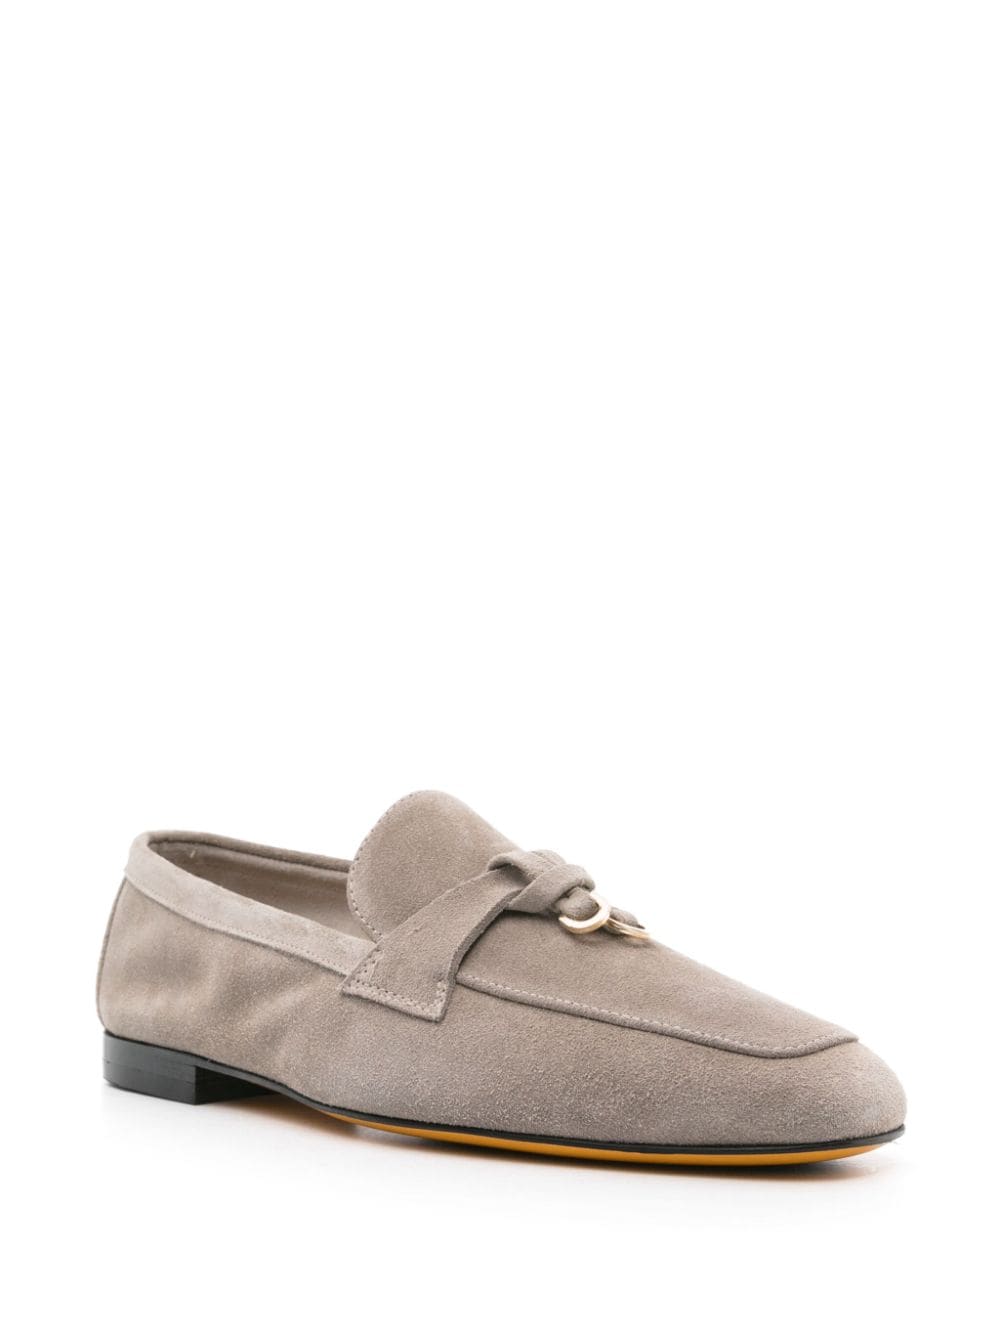 Doucal's strap-detailing suede loafers - Beige